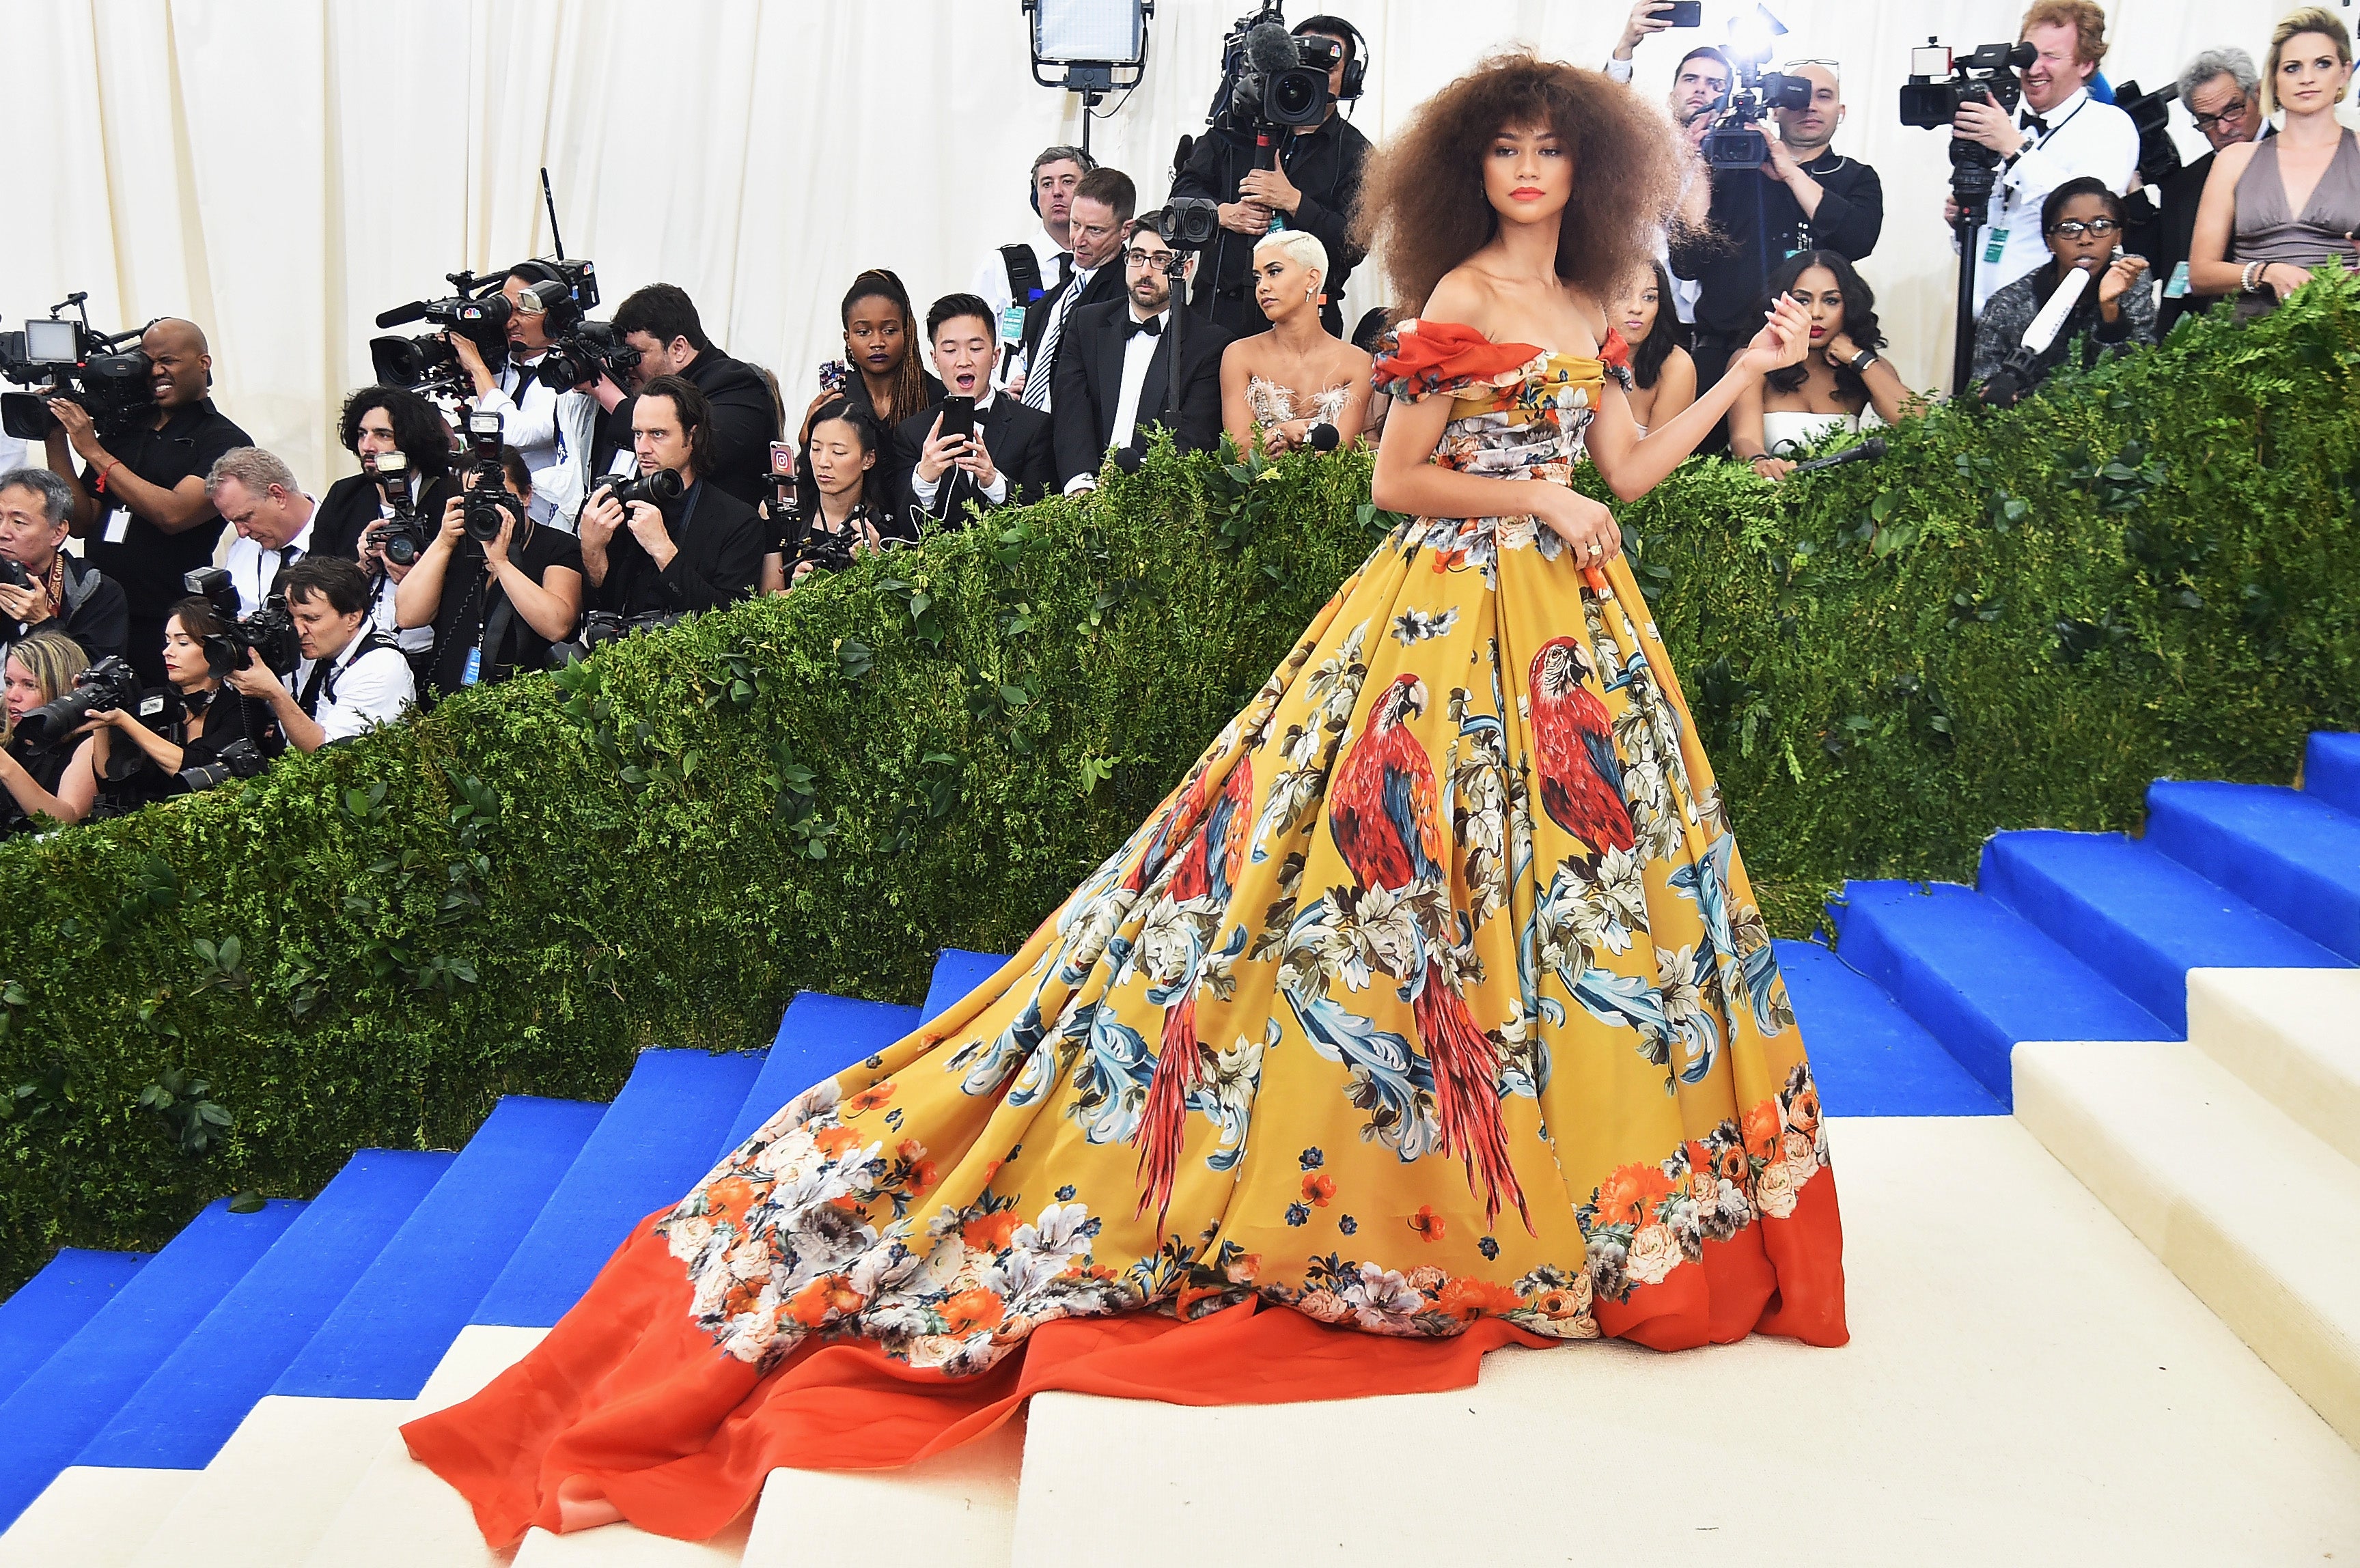 The Jaw-Dropping Fashion Moments That Stole the 2017 MET Gala
